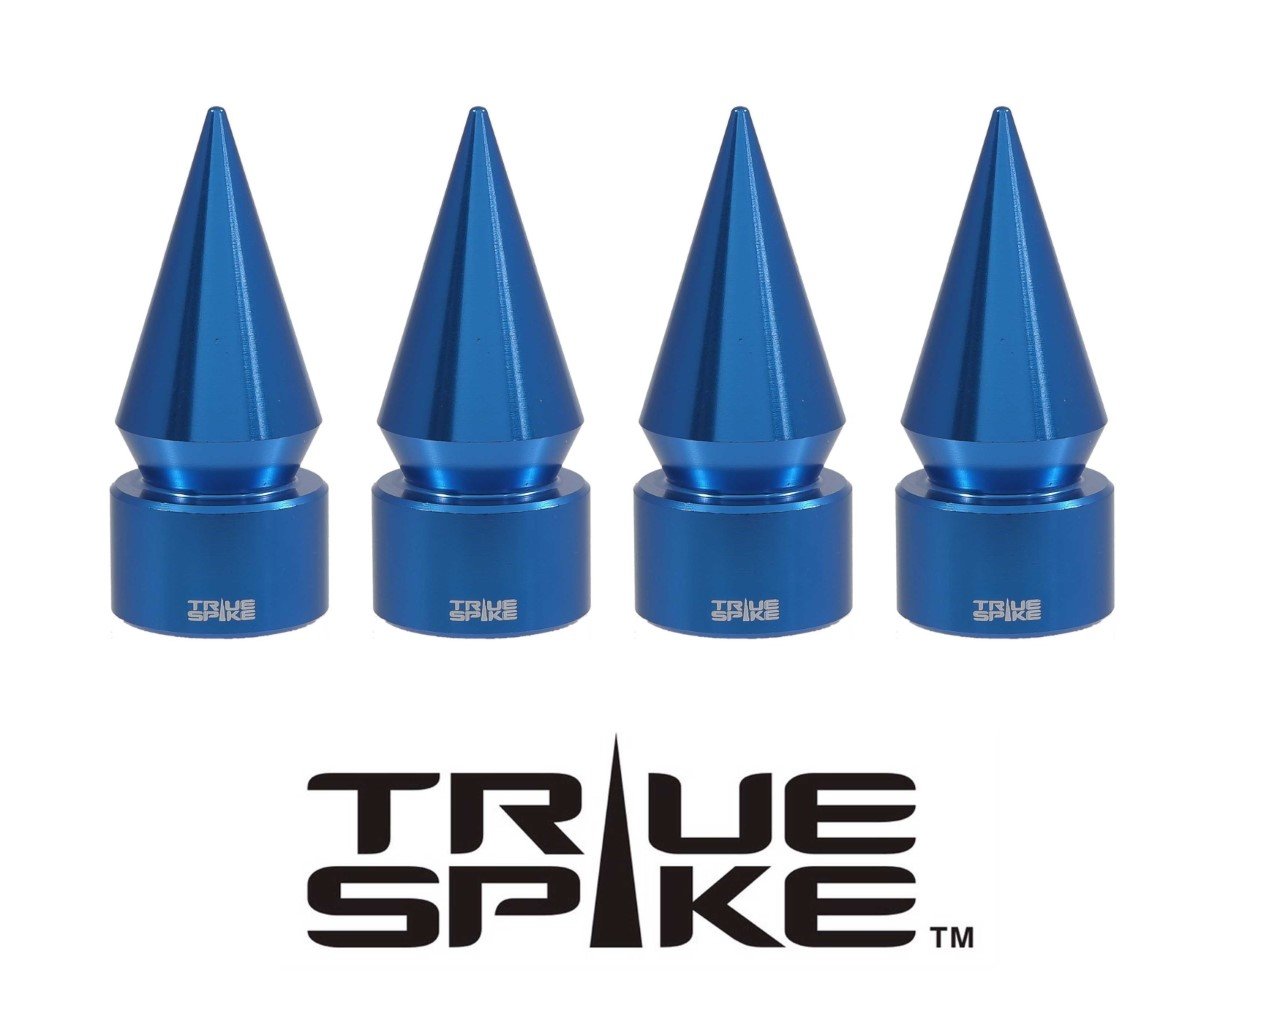 True Spike TPMS (TIRE PRESSURE MONITORING SYSTEM) SPIKE BILLET ALUMINUM AIR TIRE RIM WHEEL VALVE STEM CAP COVER KIT AVAILABLE IN MANY COLORS // PART # WVC003